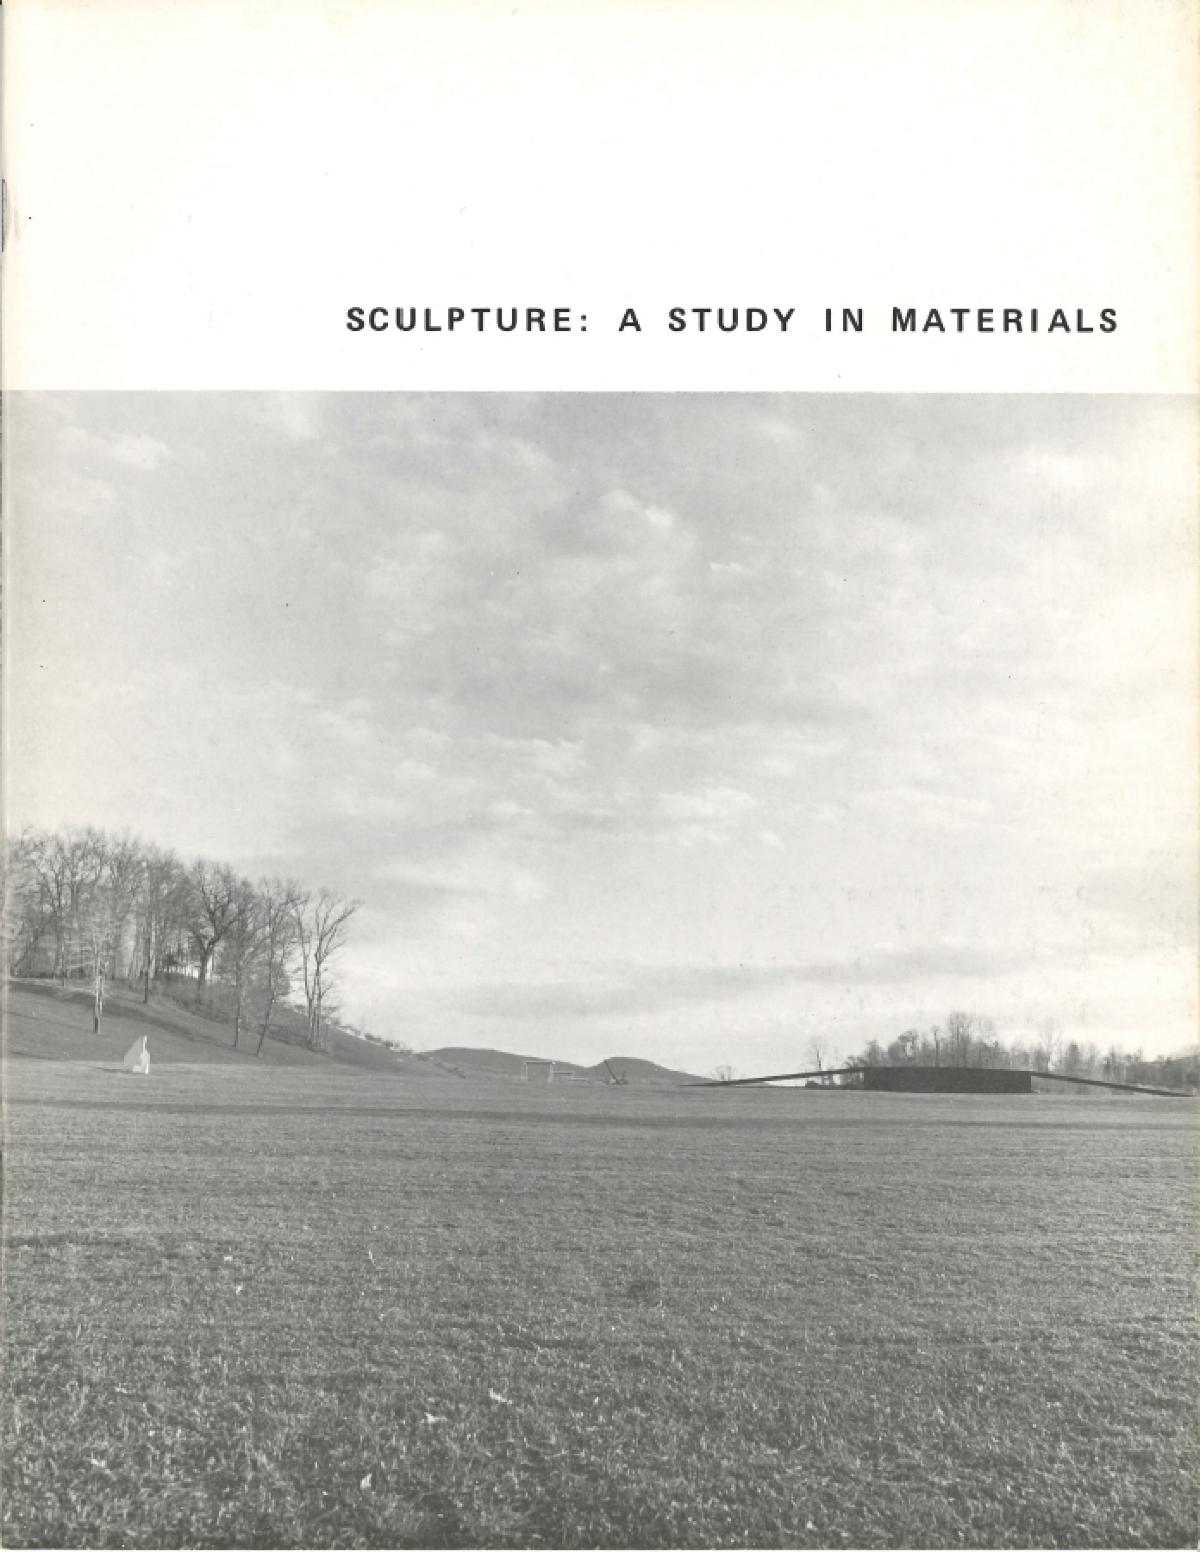 Sculpture A Study in Materials, May 17 - October 30, 1978, catalogue cover 